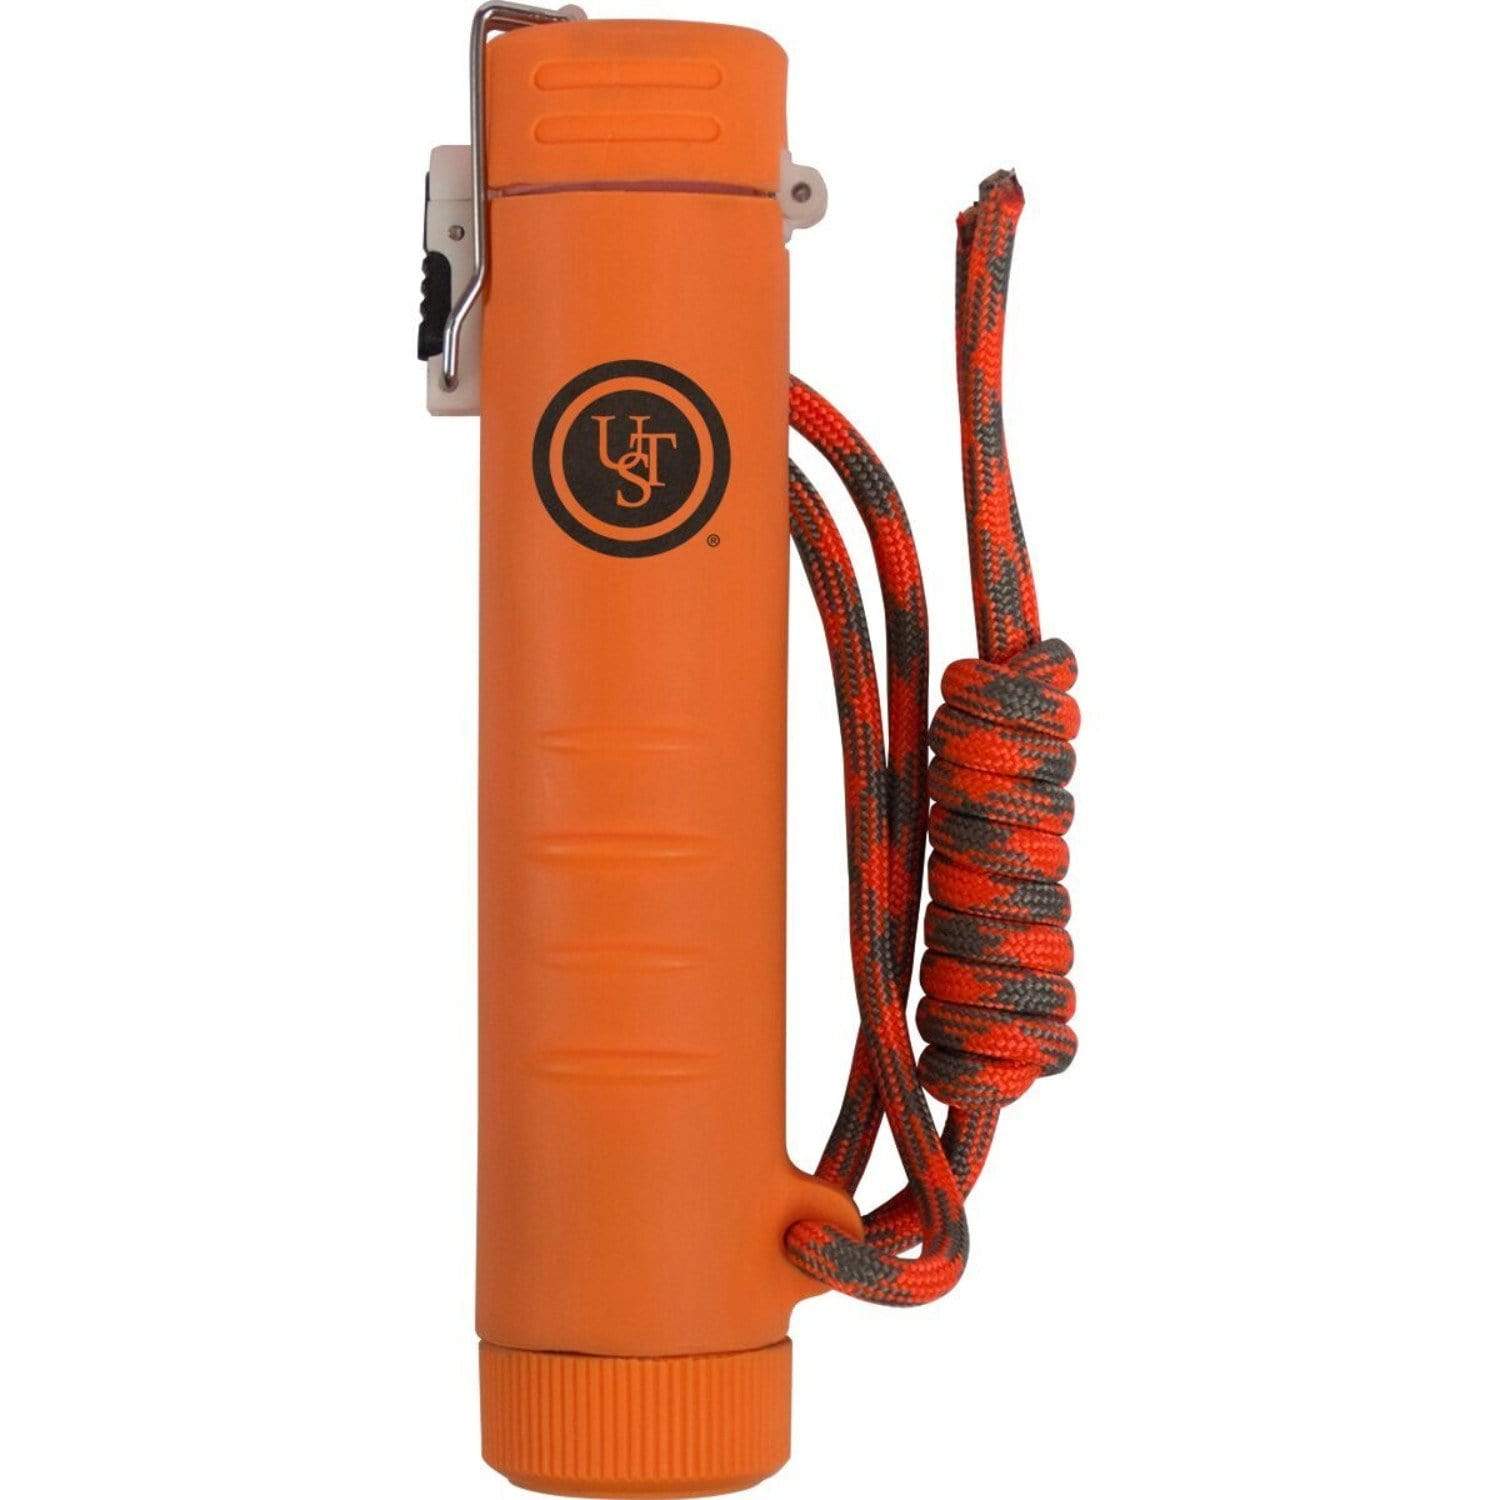 UST Brands Camping & Outdoor : Survival UST TekFire Charge Fuel-Free Lighter